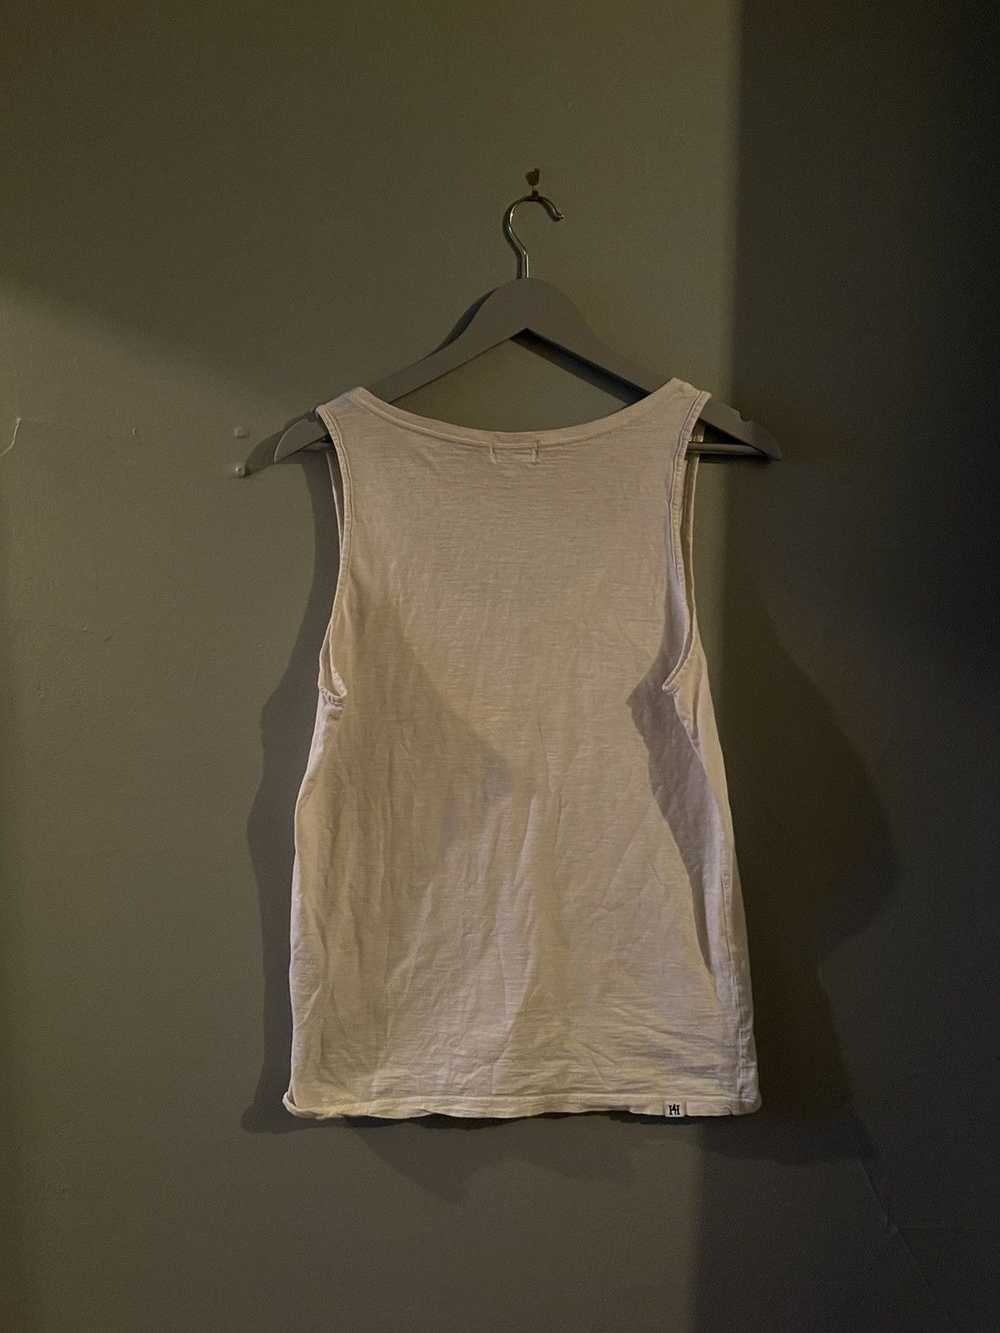 Hysteric Glamour Hysteric Glamour Tank Top - image 2